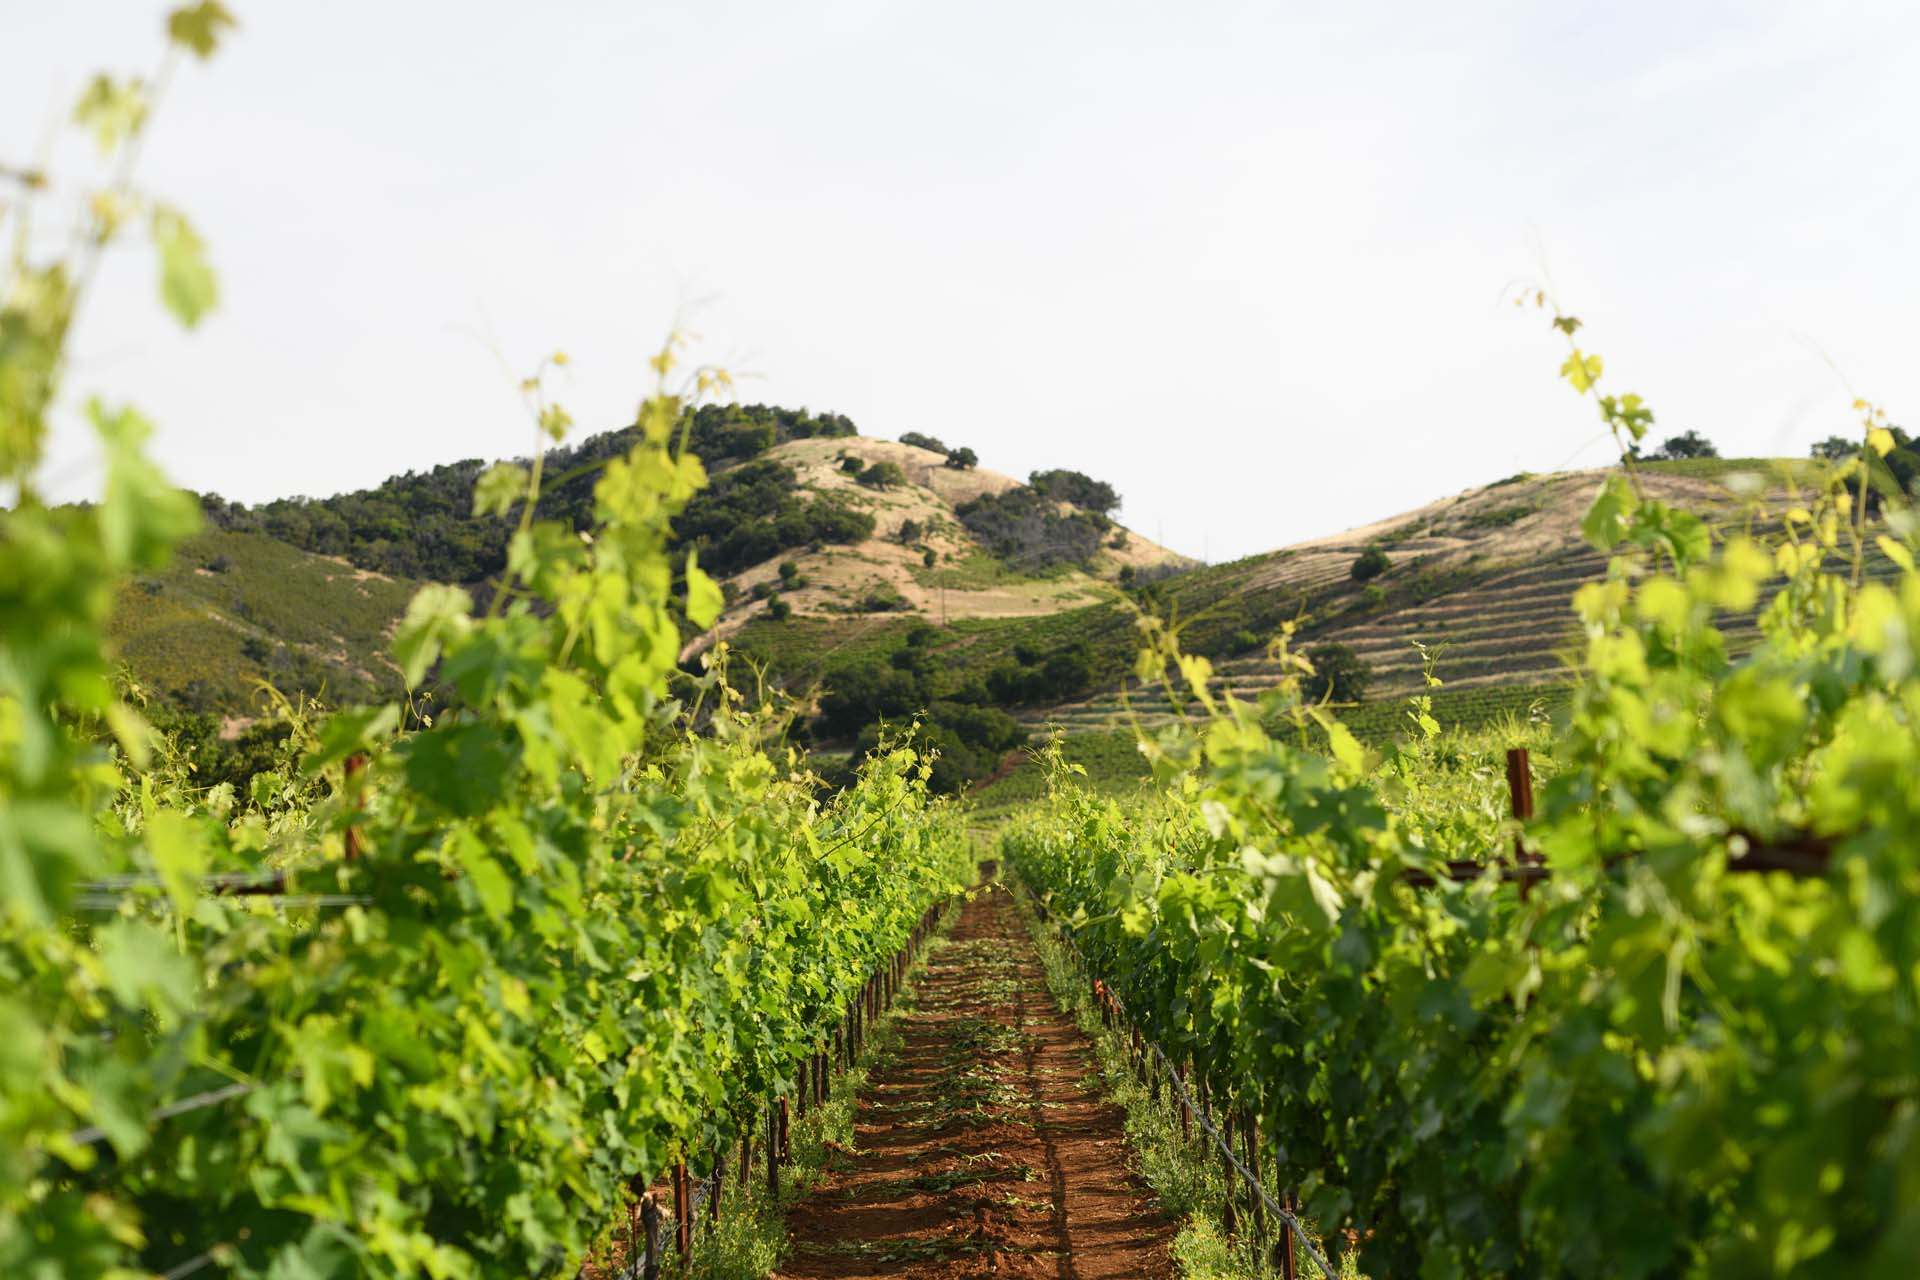 photograph taken between grapevines with mountains in the distance